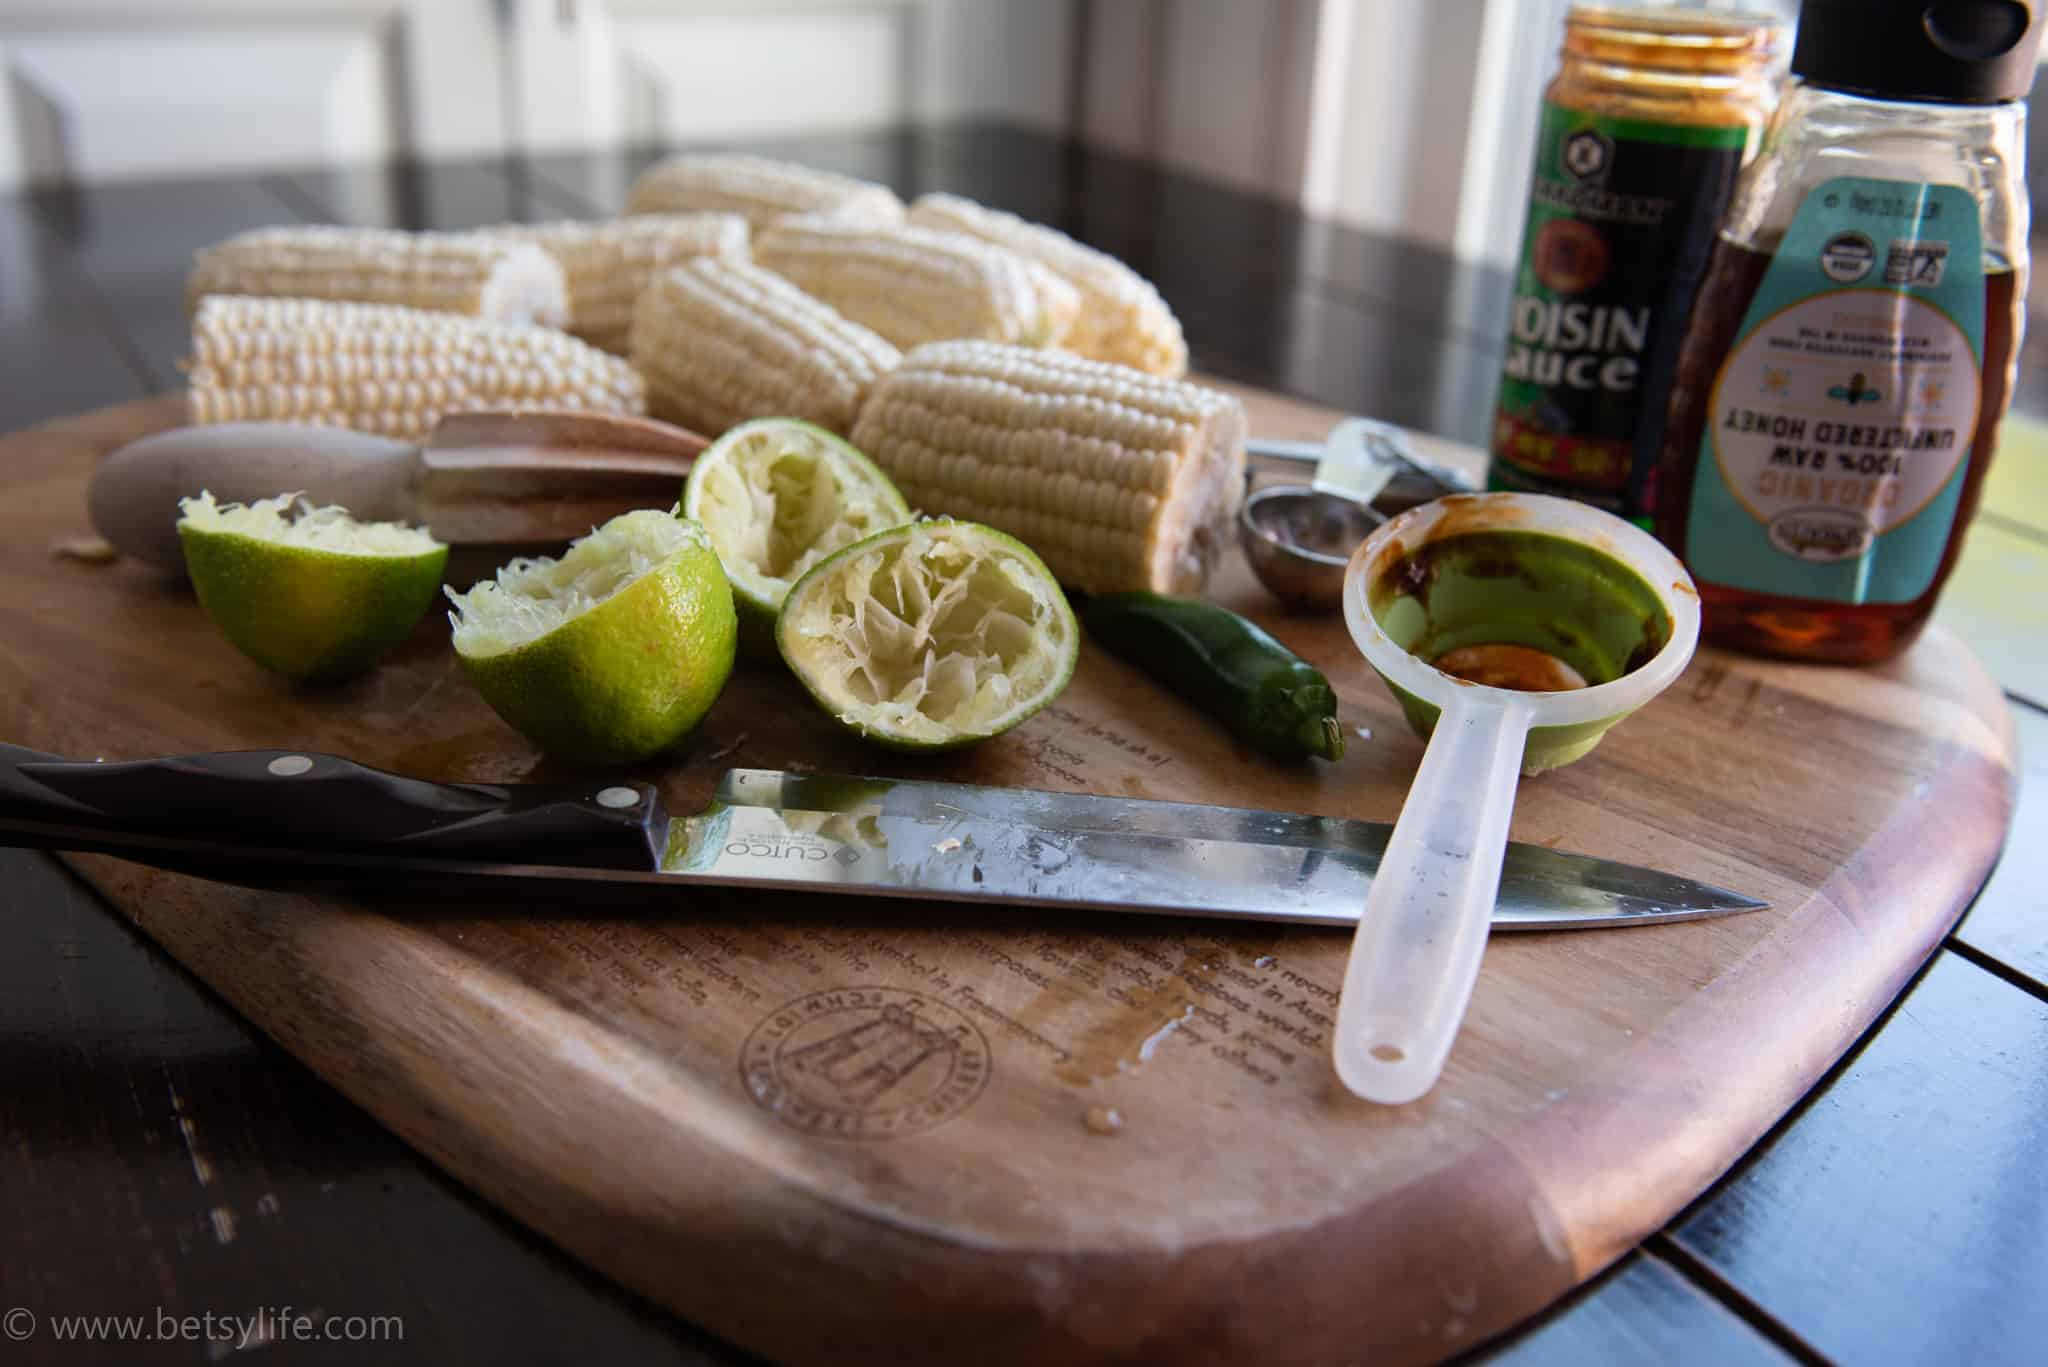 cutting board with cut, juiced limes, hoisin sauce, uncooked corn on the cob, honey, measuring cup and spoons, knife